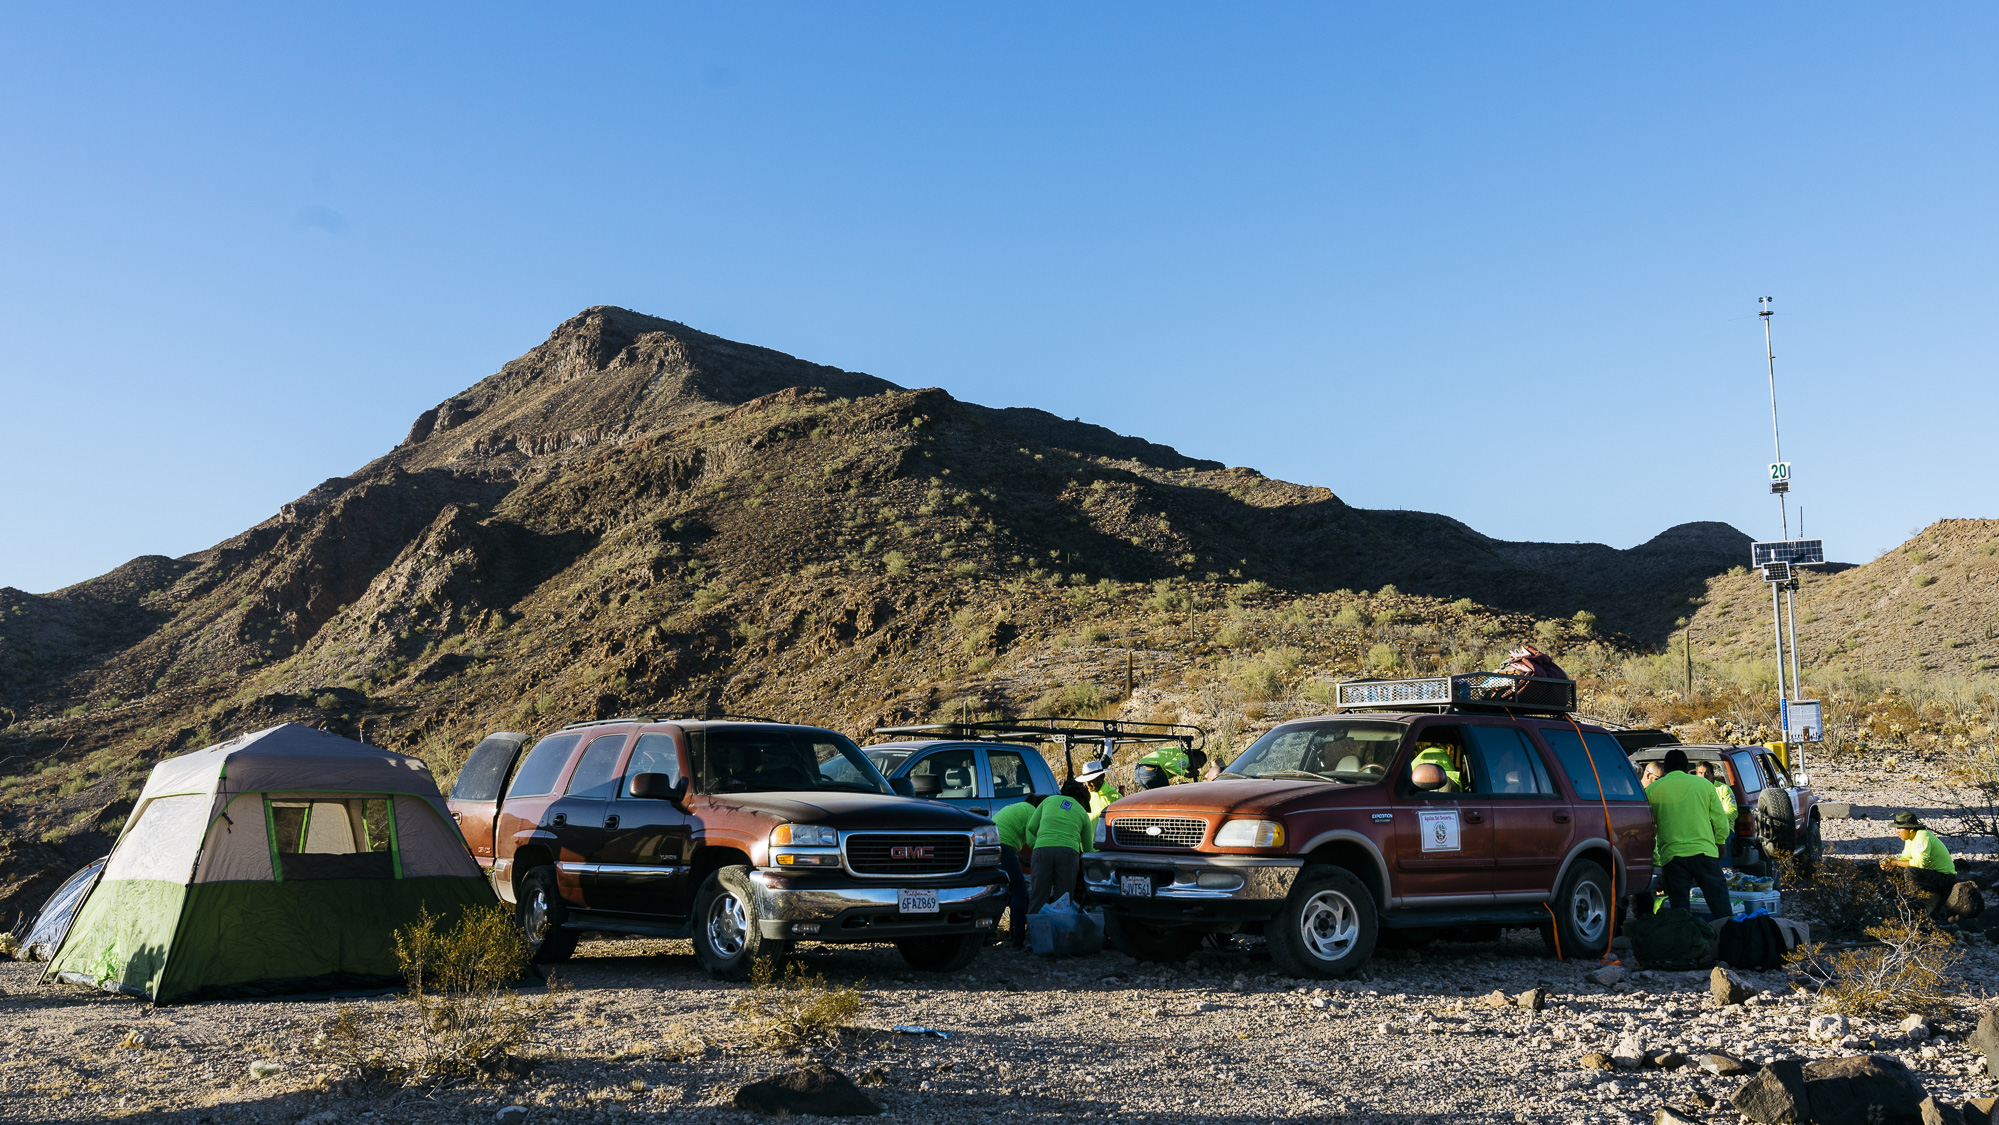  IMAGE CAPTION:  Aguilas Del Desierto camp setup at the end of Charlie Bell Road in the Cabeza Prieta National Wildlife Refuge. The Refuge ecompasses nearly 860,000 acres of desert.    